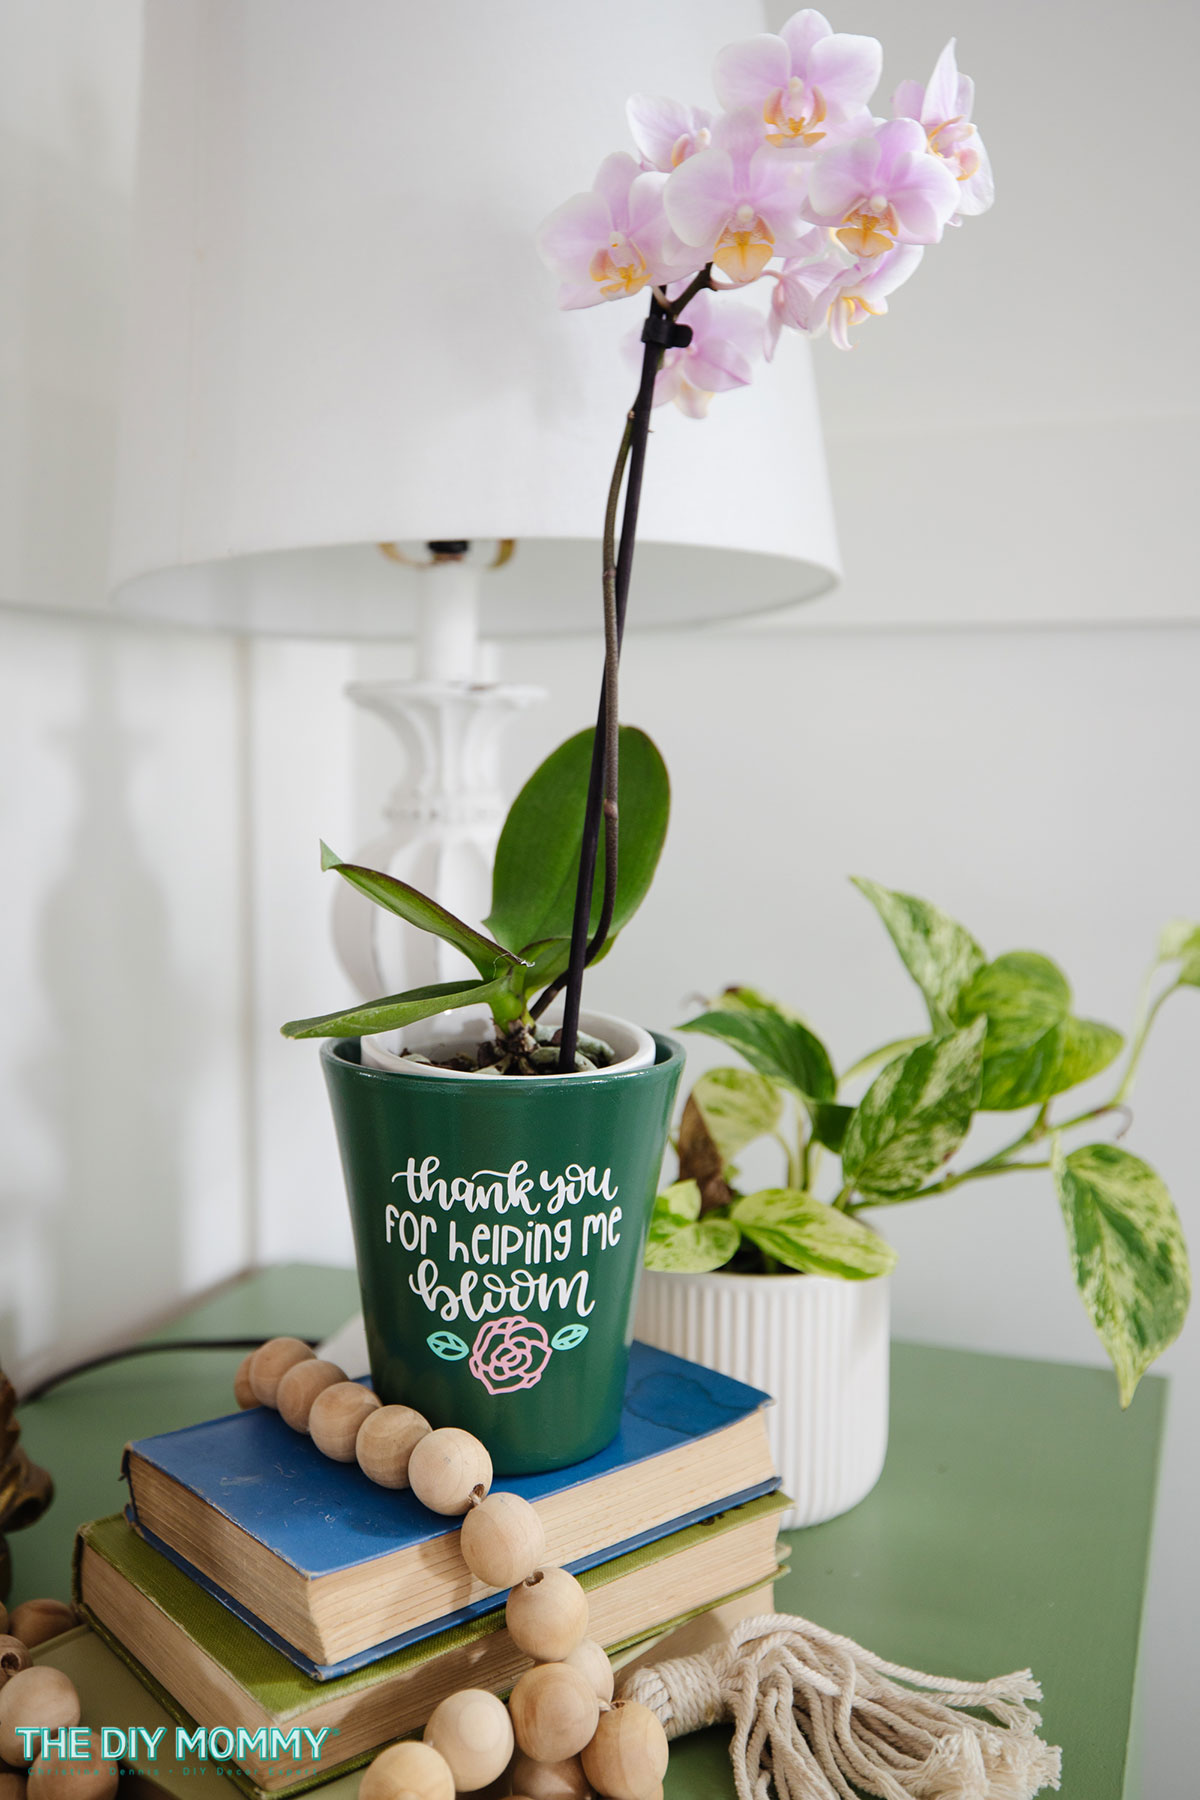 The personalized gardening gift of an orchid in a plant pot. The pot is decorated with a decal that reads "Thank you for helping me bloom."